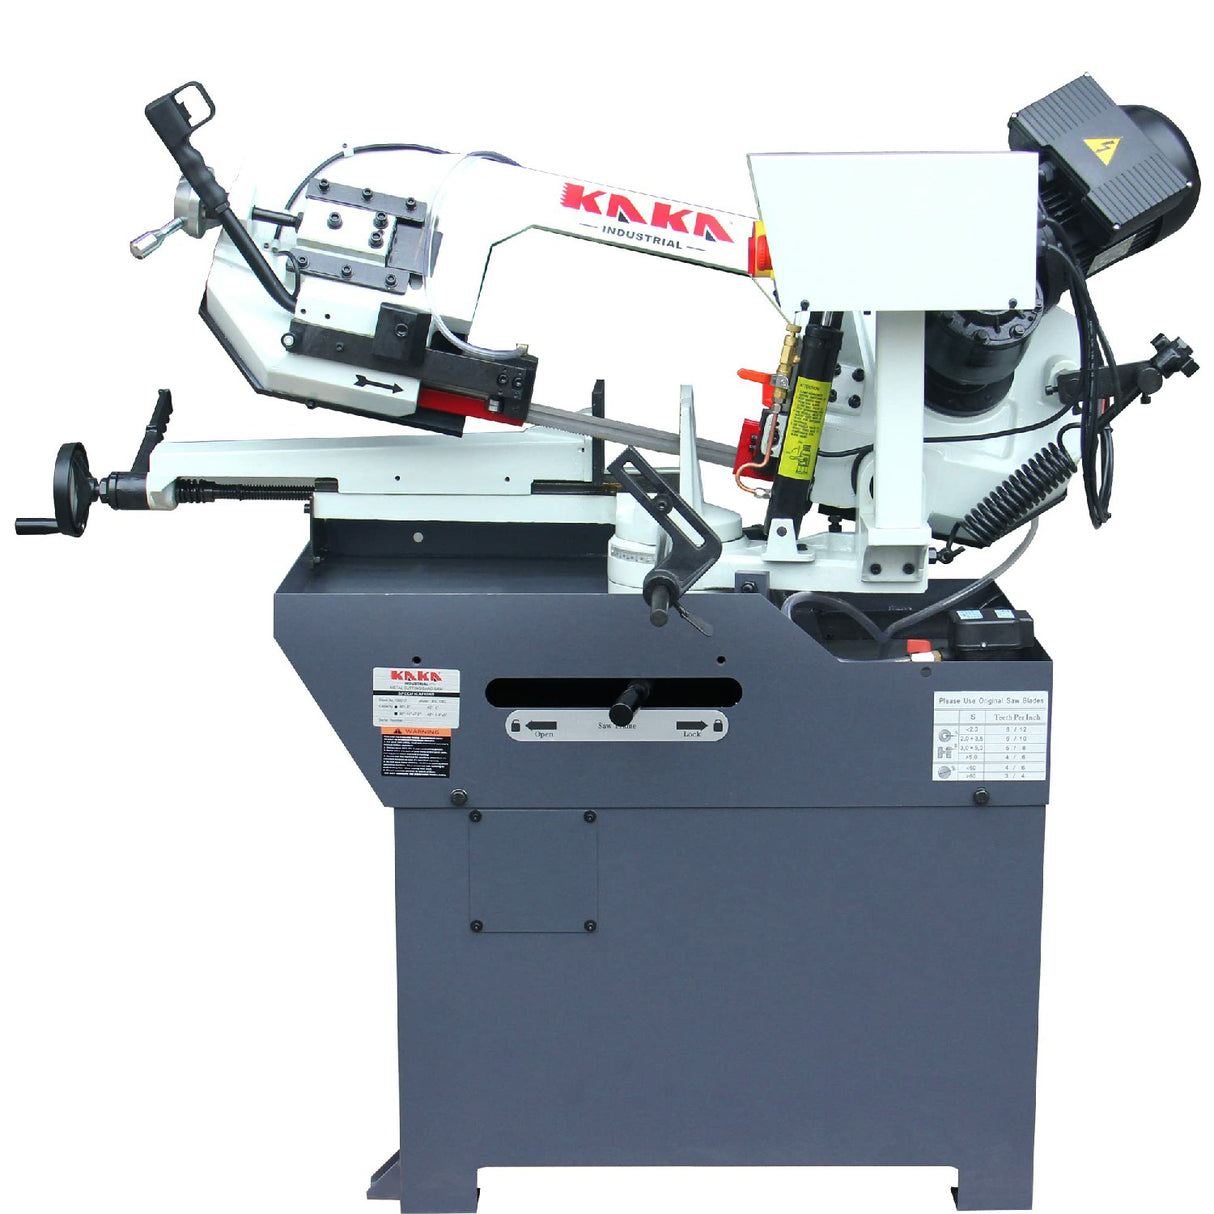 KANG Industrial BS-108G Miter Band Saw, 240V Motor. 260x200mm Capacity with Front Control Panel